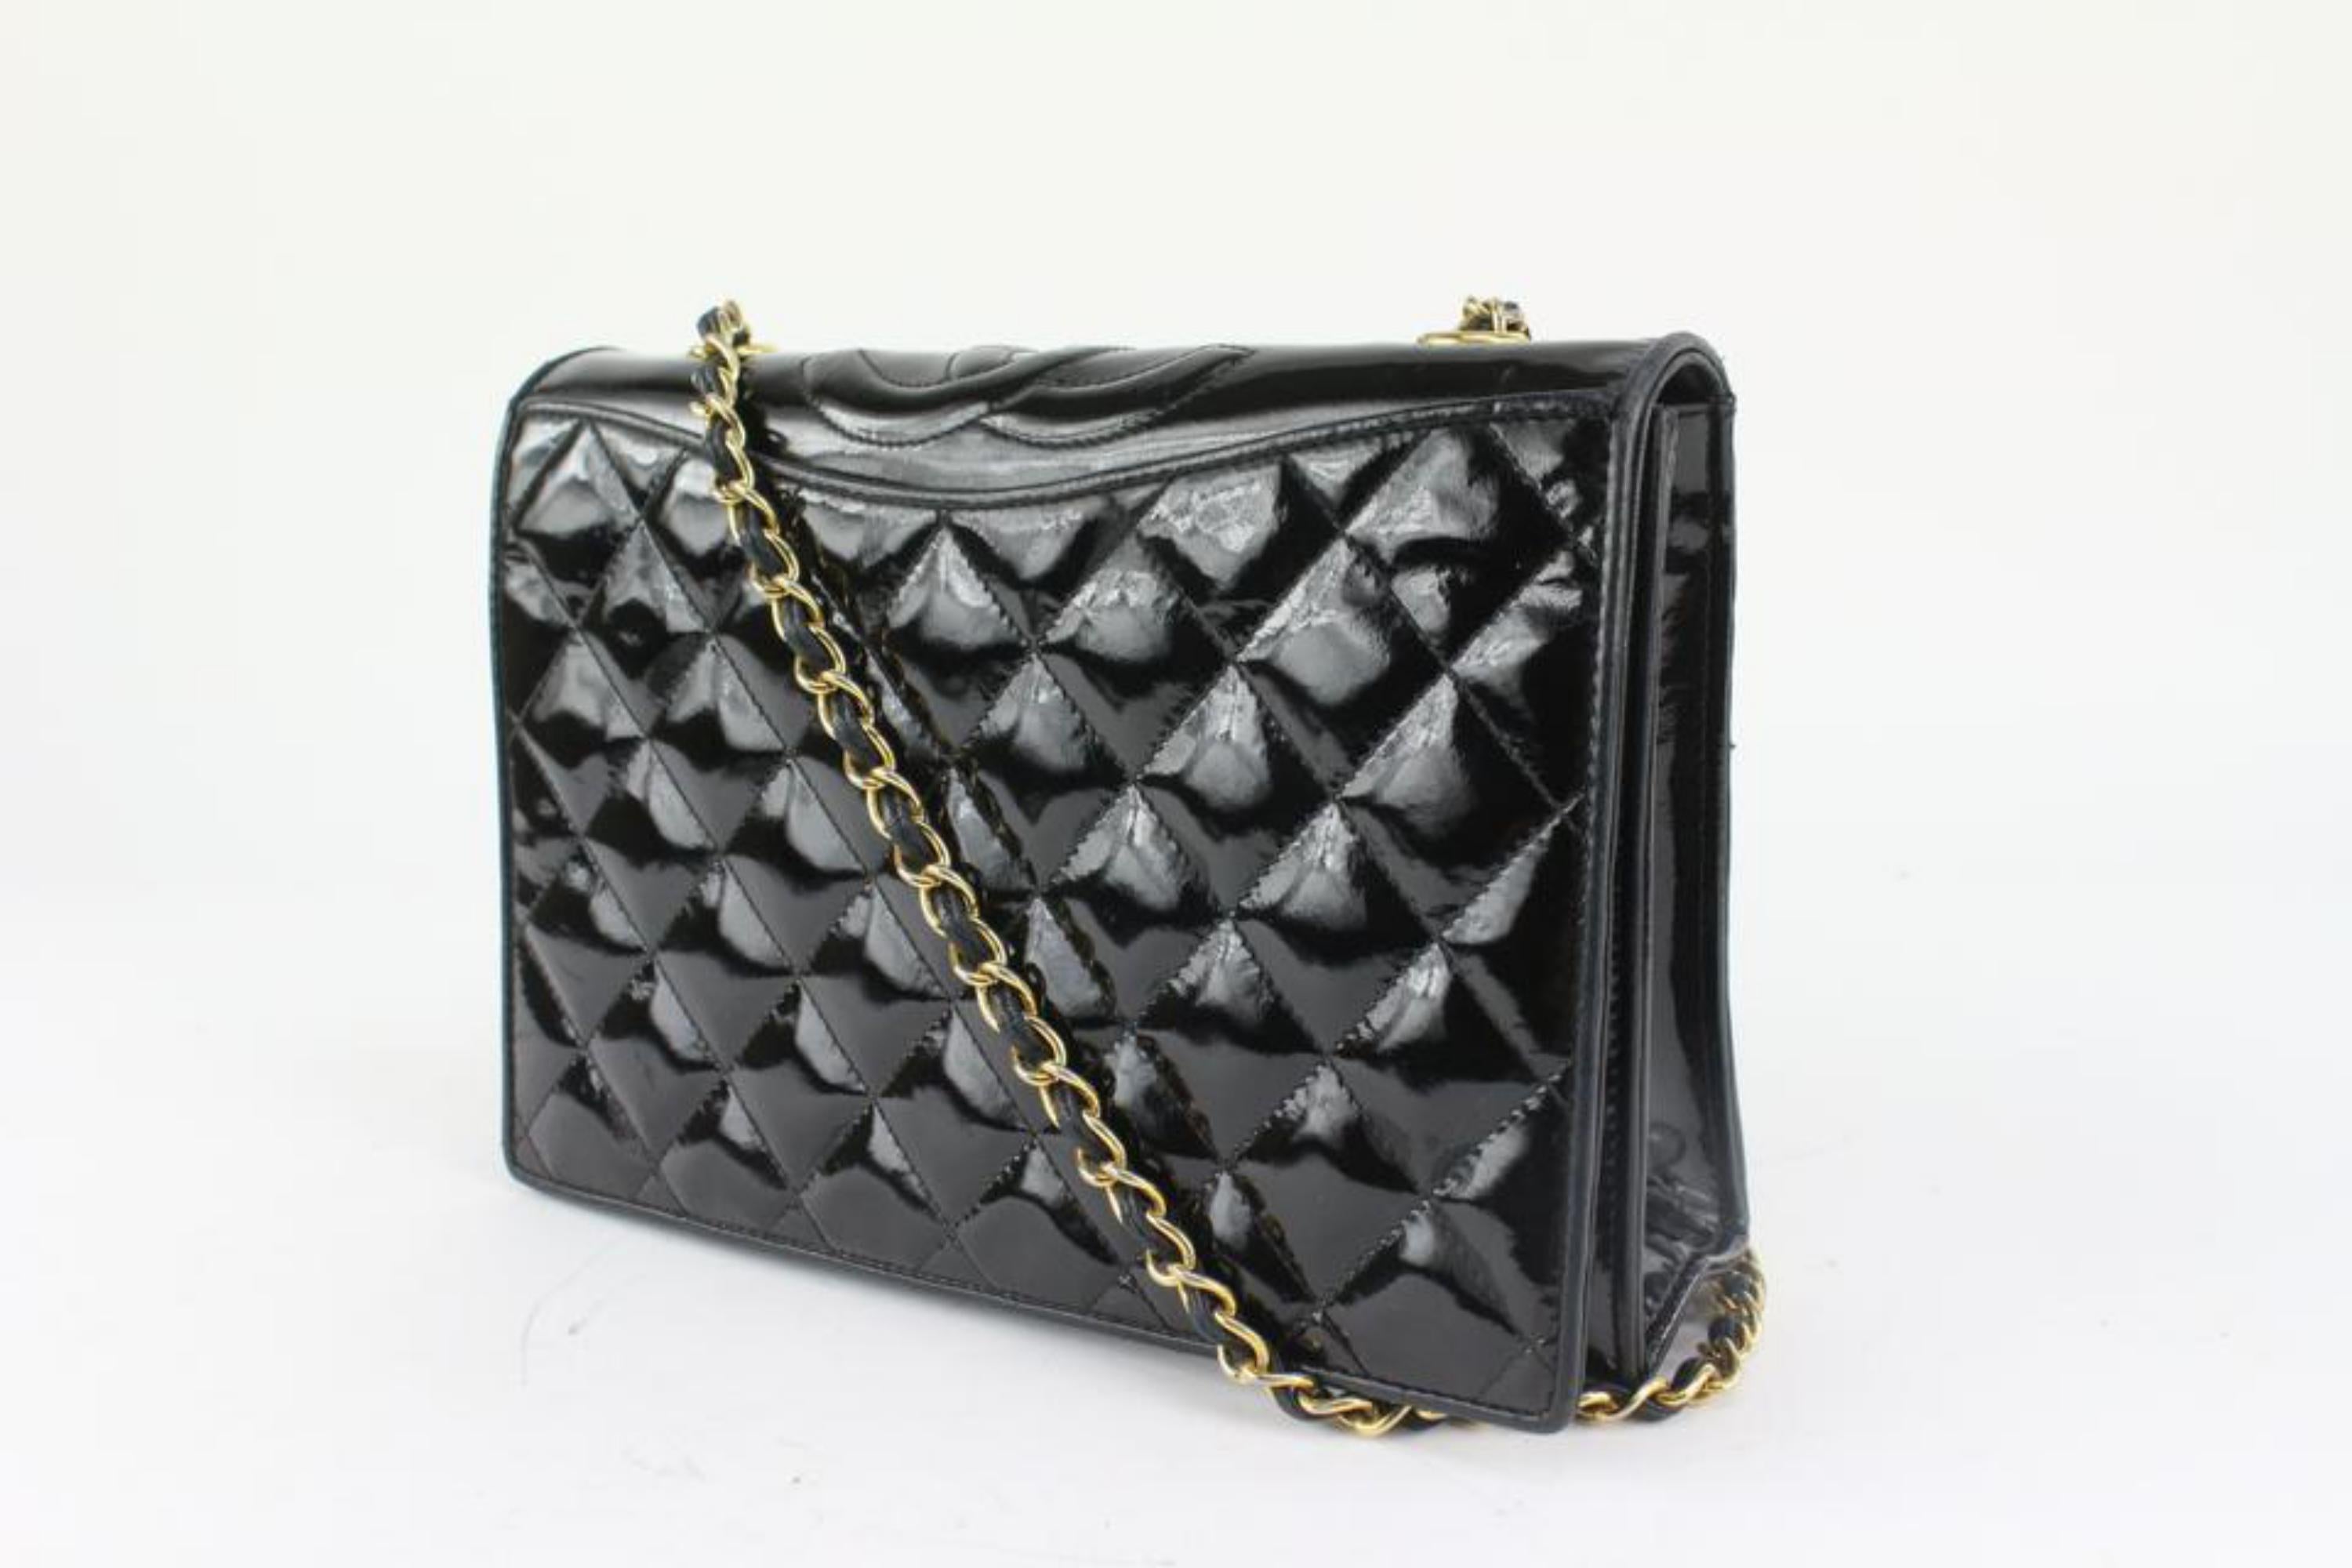 Chanel Black Quilted Patent Round Top CC Flap Bag 1215c45 For Sale 5